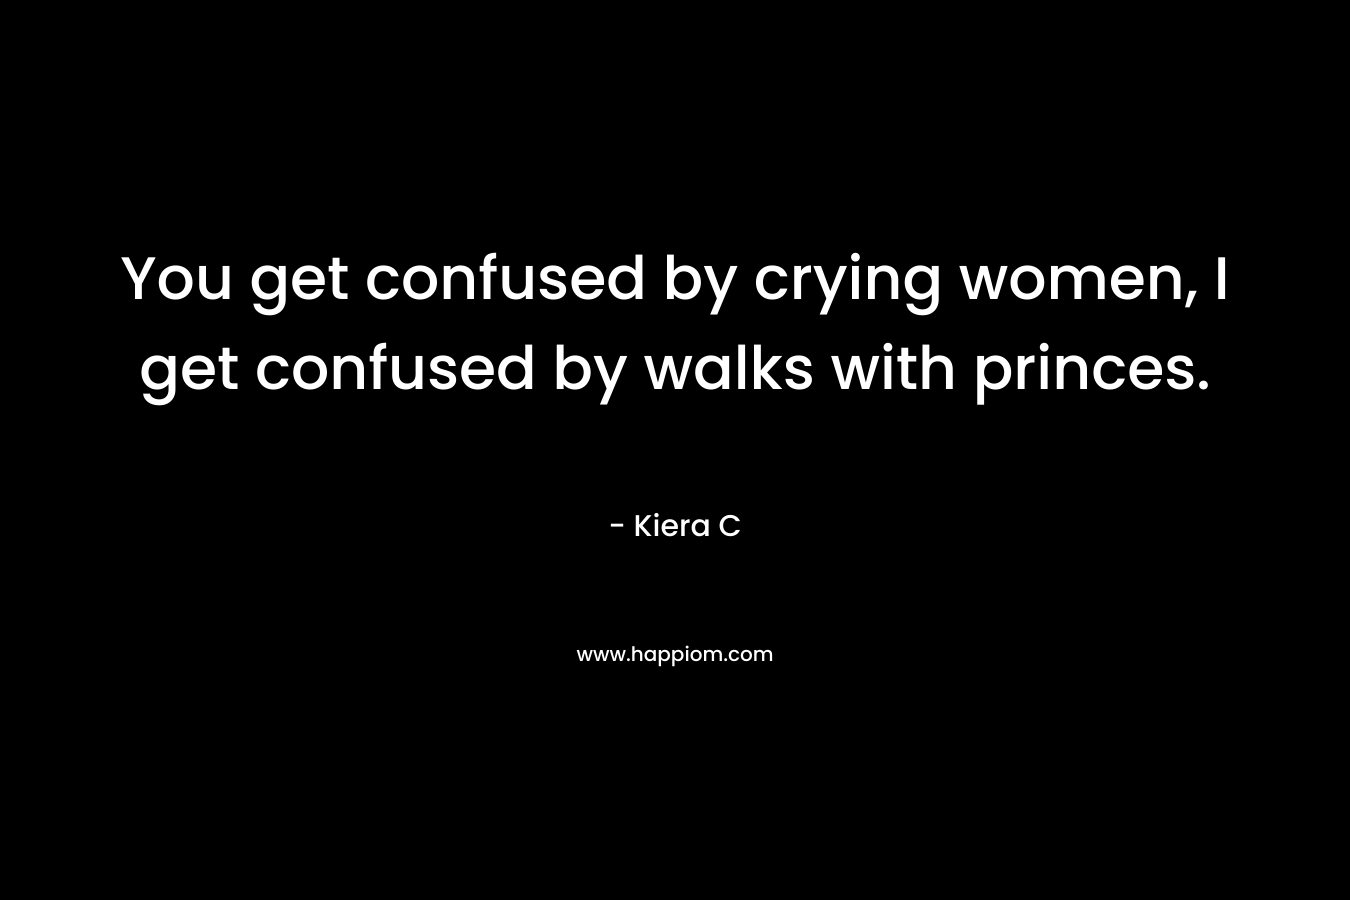 You get confused by crying women, I get confused by walks with princes.